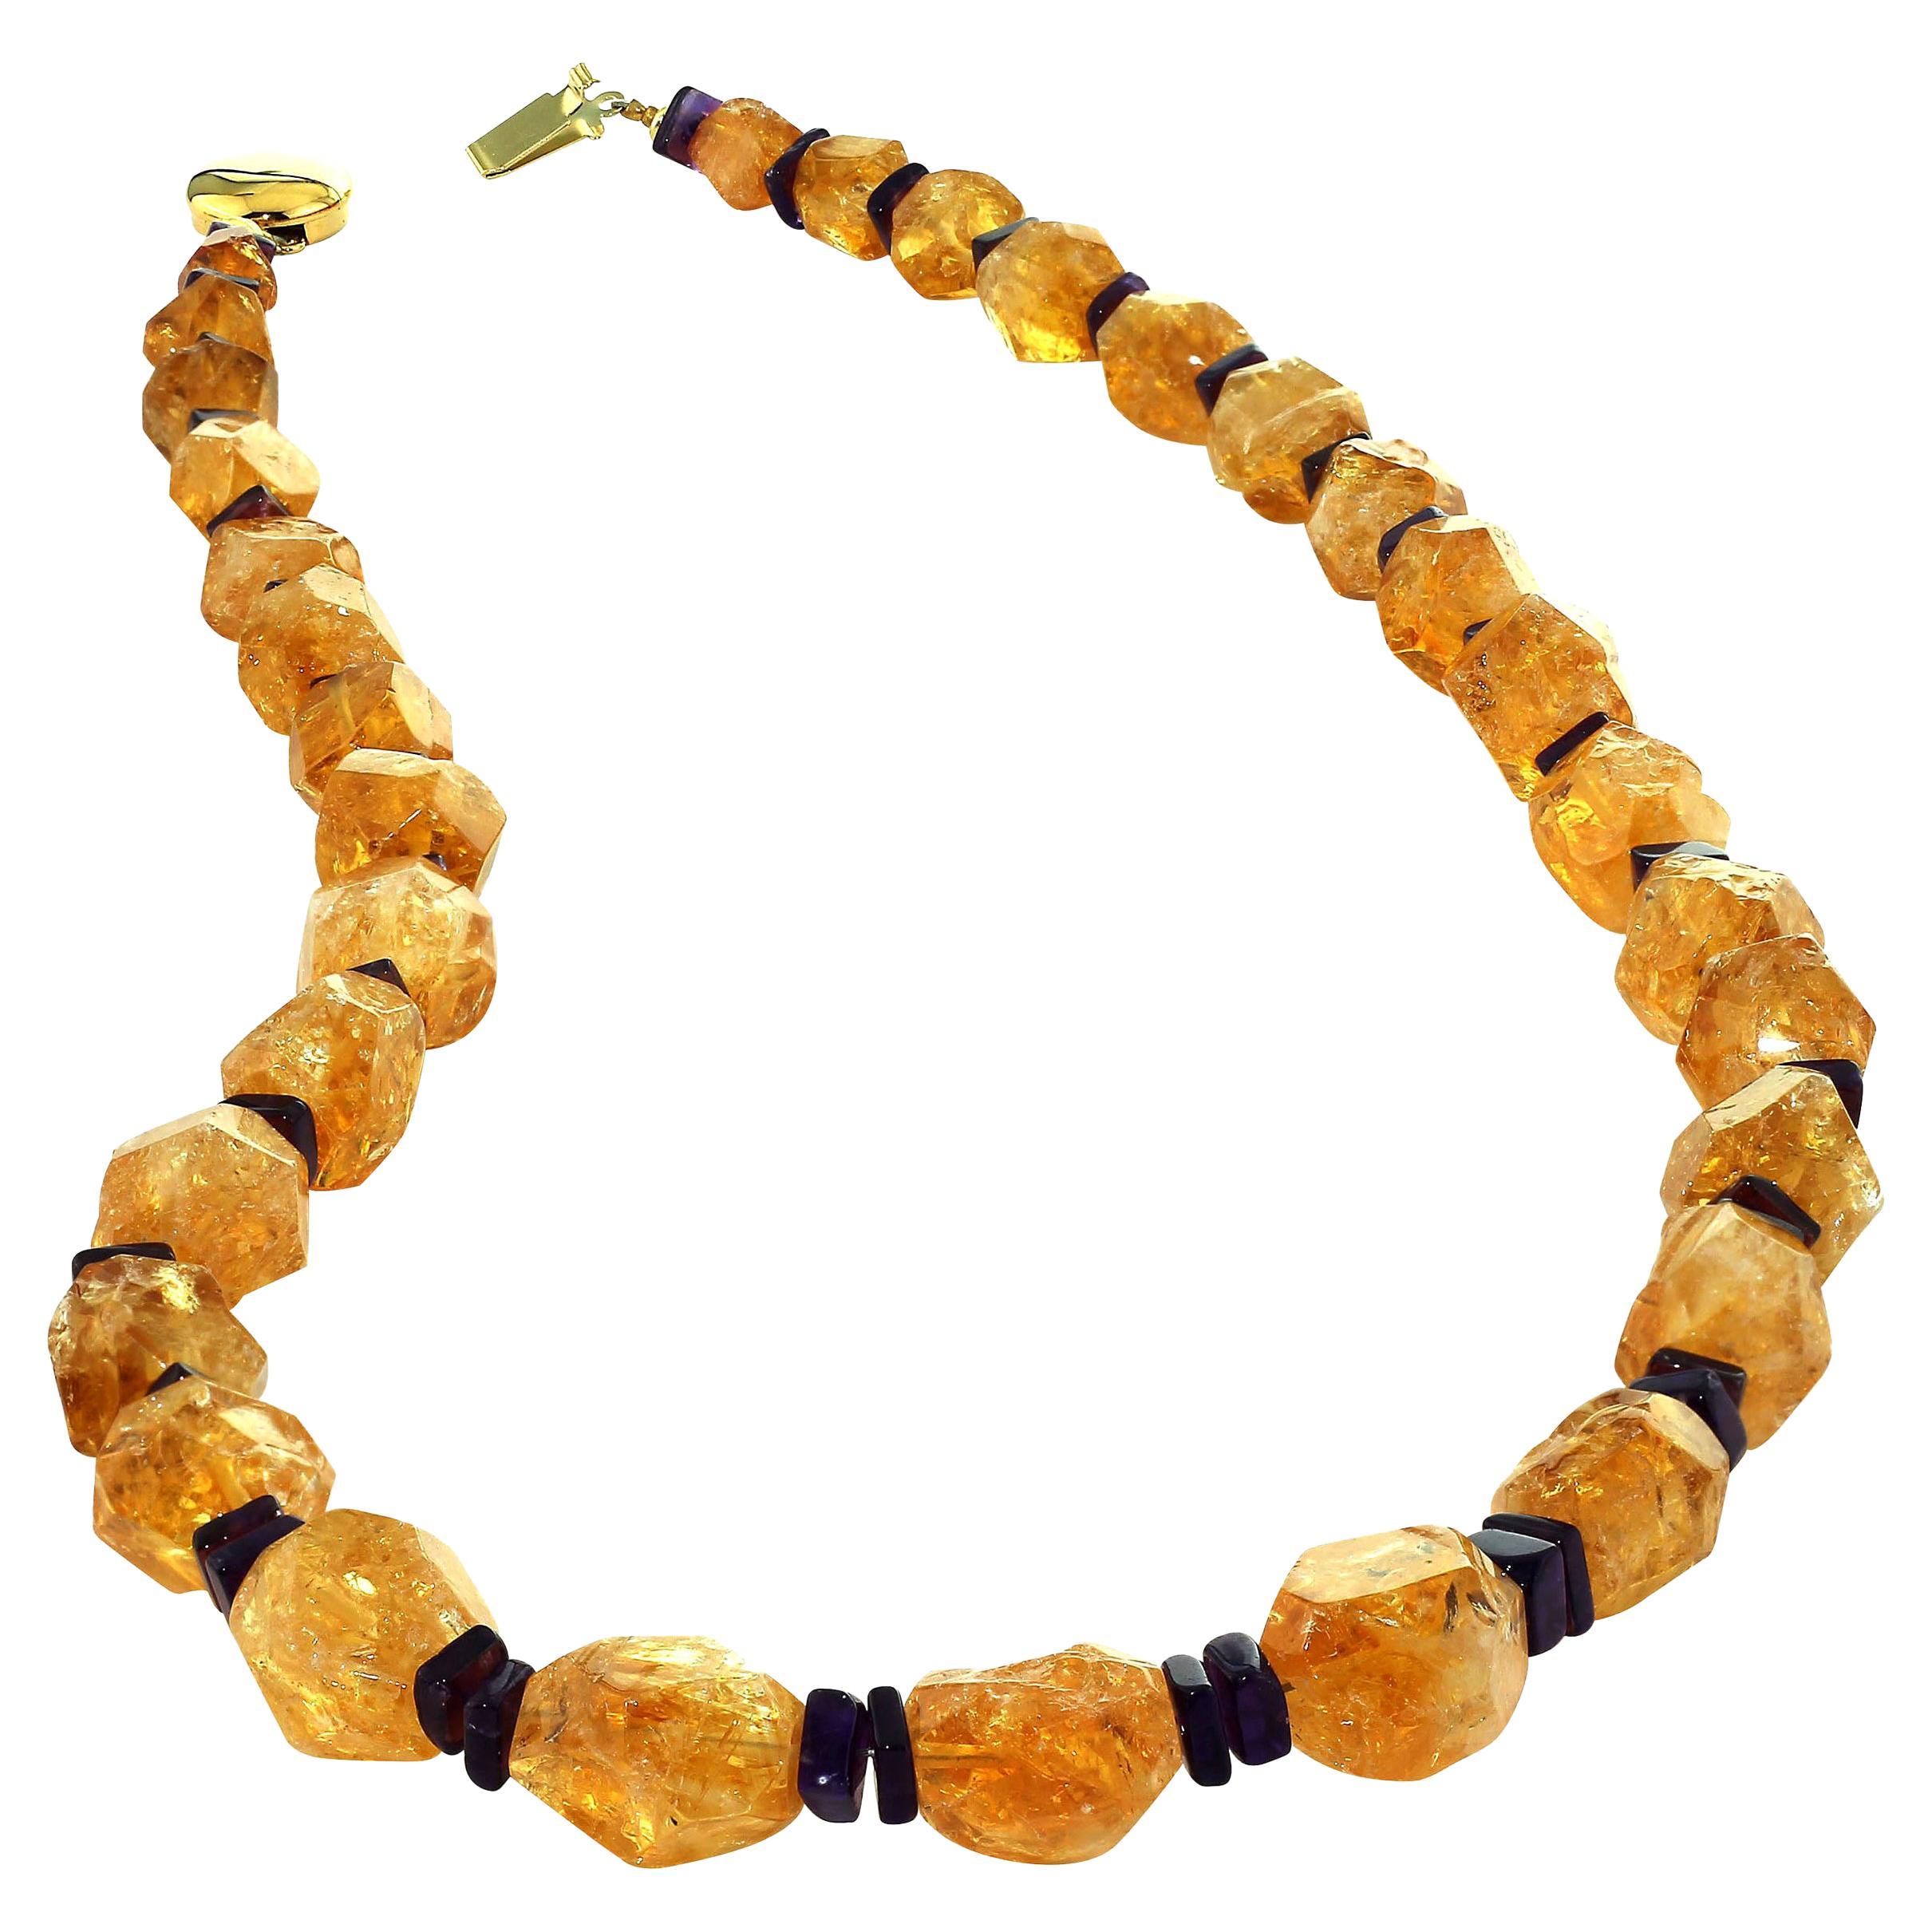 Handmade necklace of rich, golden Citrine roughly faceted and highly polished are accented with square slices of purple Amethyst. These Citrines are graduated up to 15 MM. This unique necklace is 21 inches in length. It is a lovely golden color